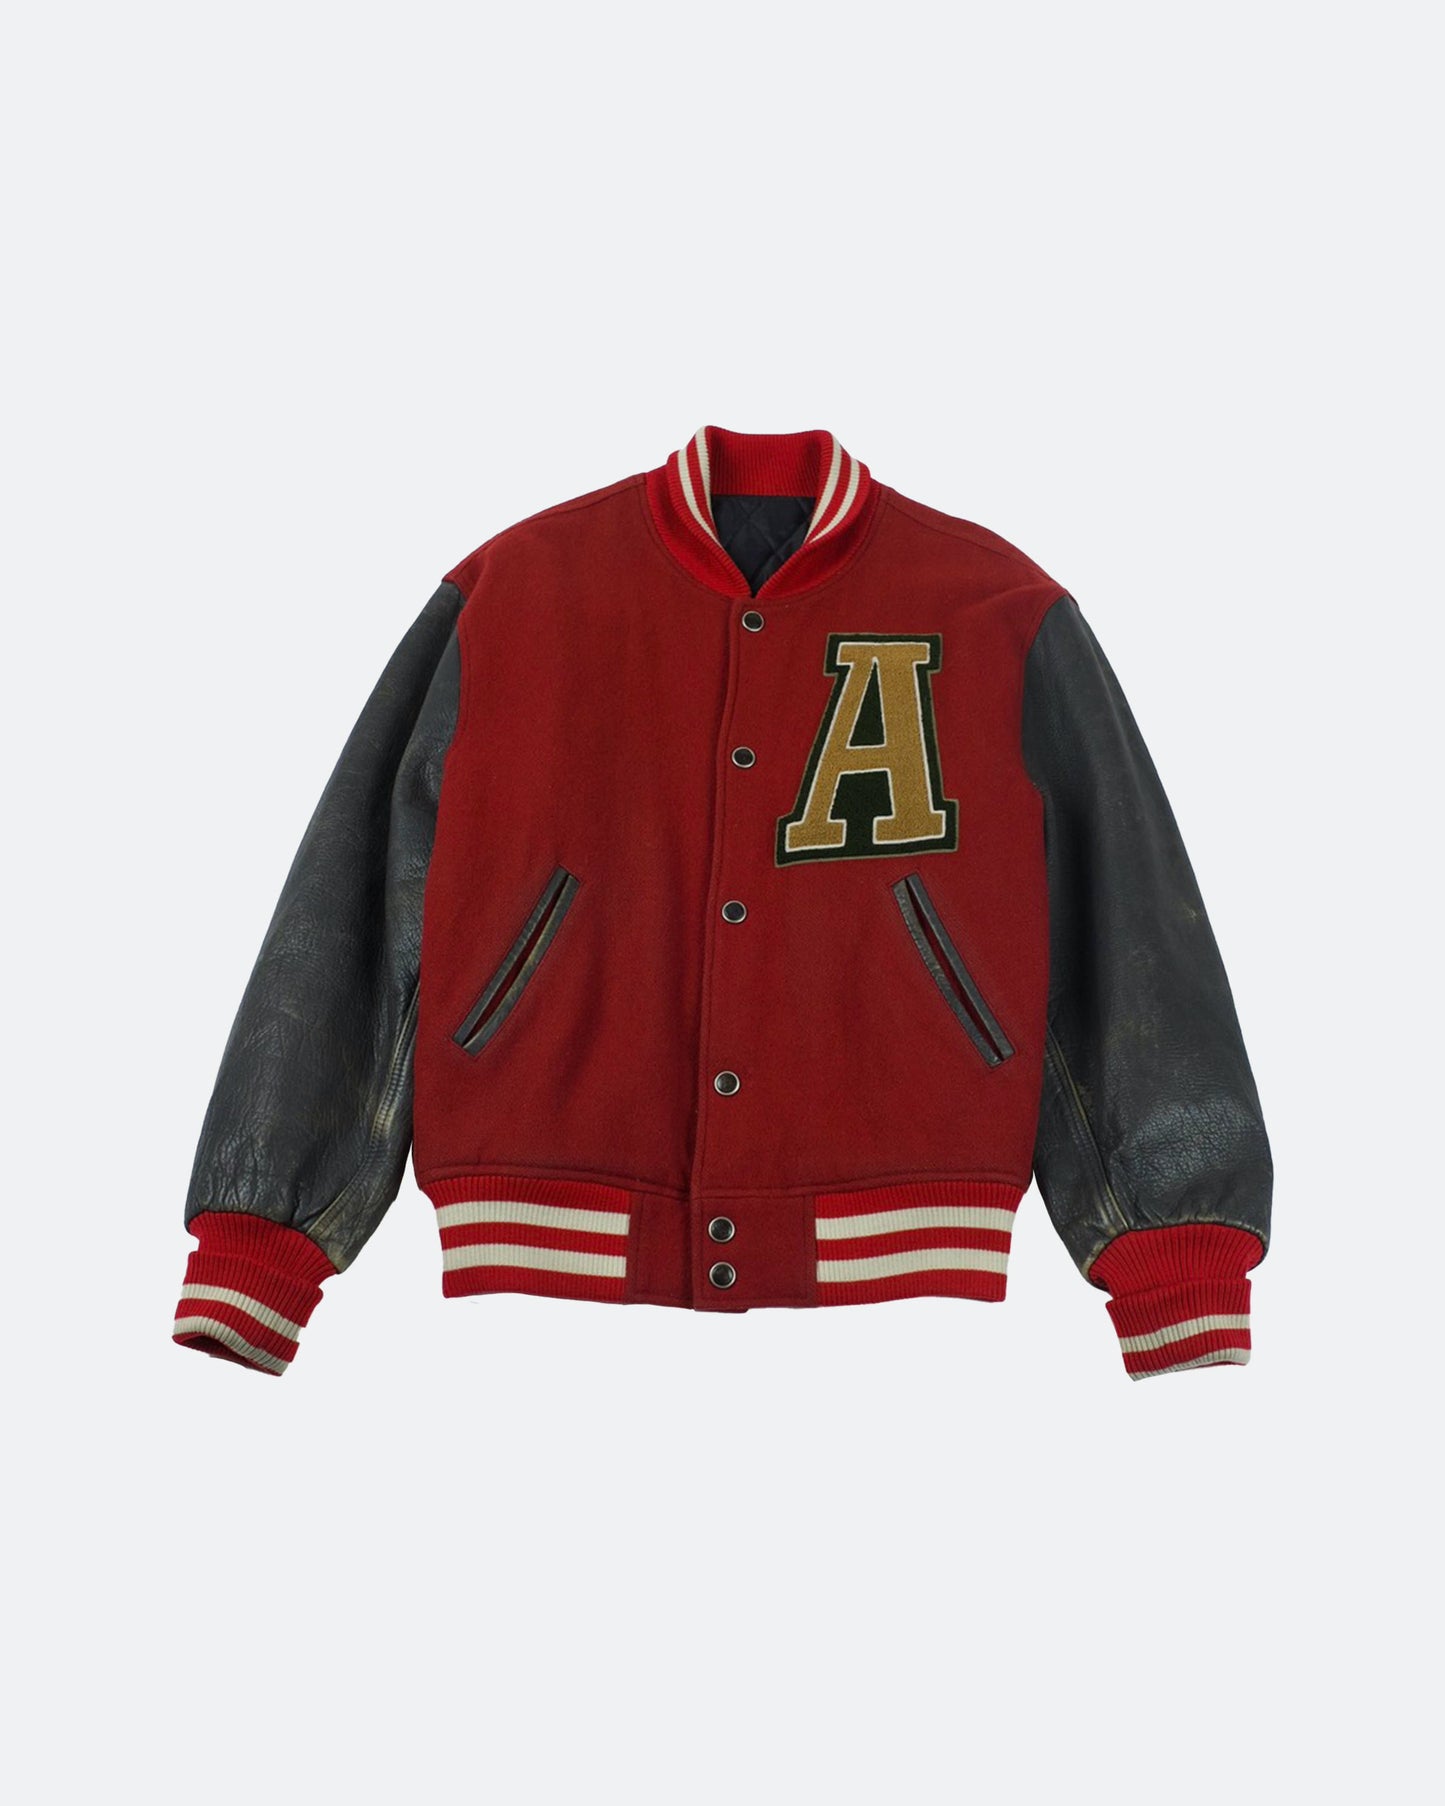 Abahouse Red/Brown Varsity Jacket